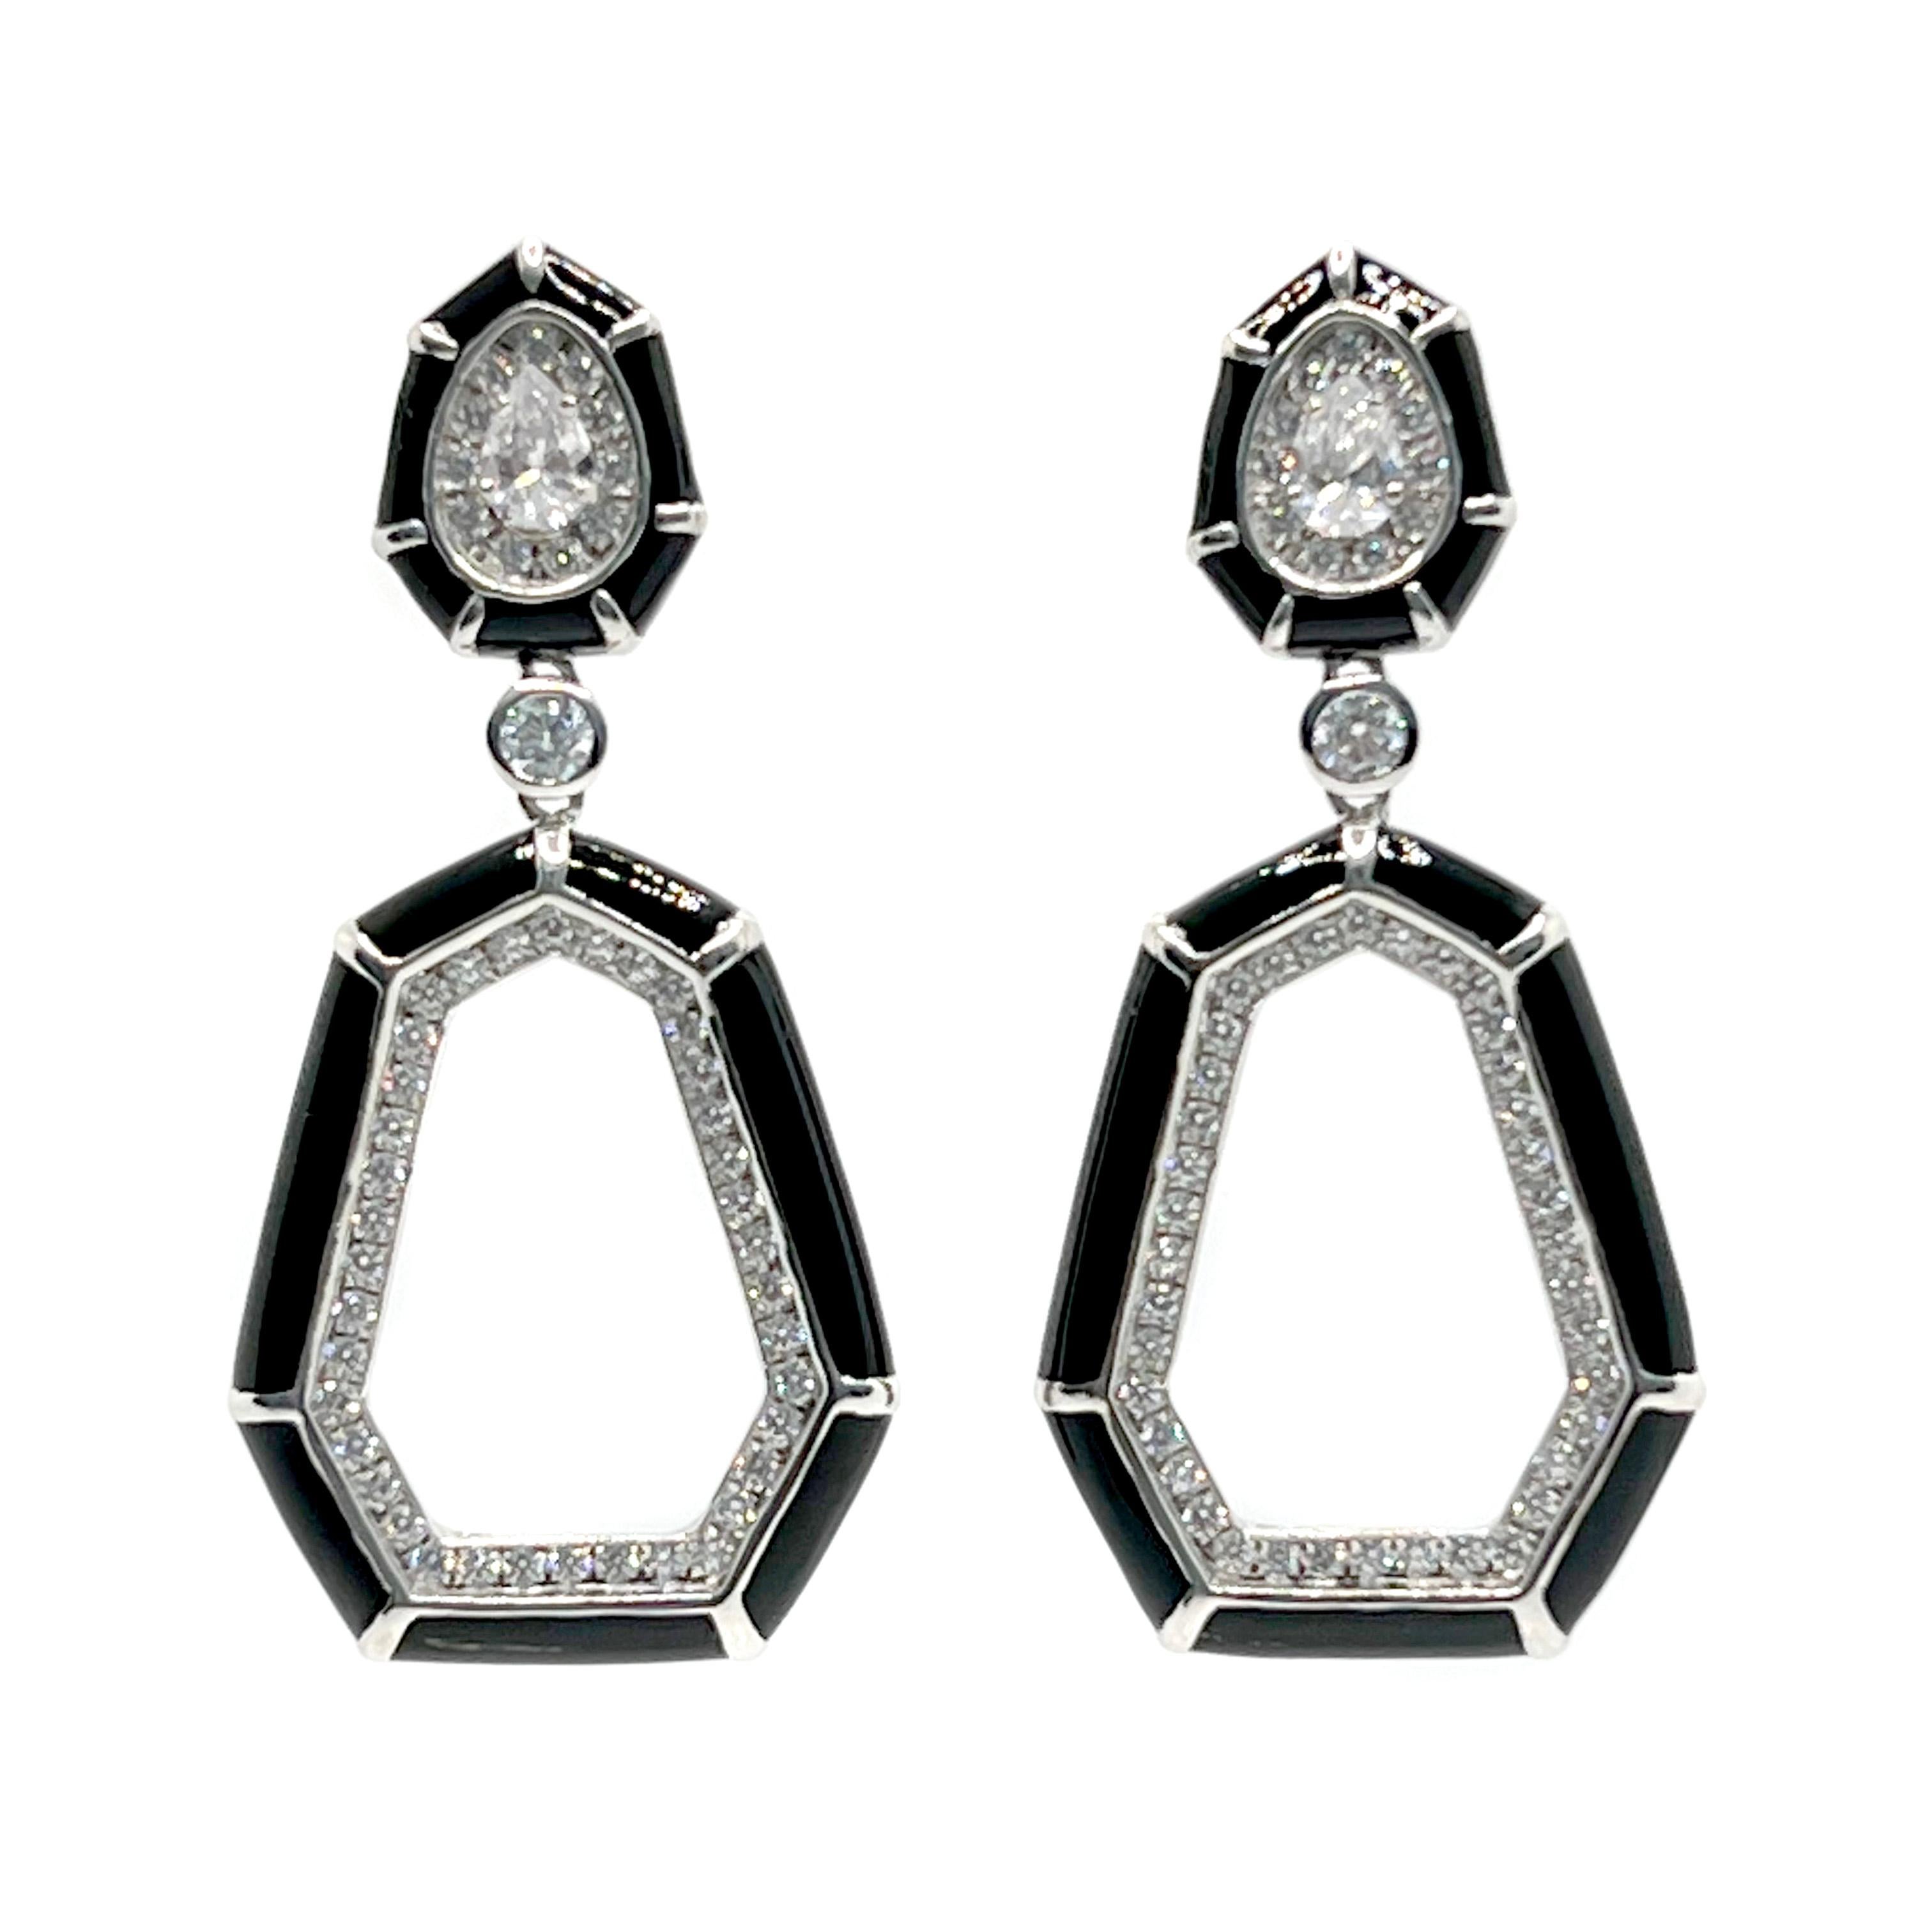 Stunning Black Enamel Septagon Door Knocker earrings. Handset with round and pear shape simulated diamonds on platinum rhodium plated over sterling silver and finished with shiny white enamel. The earrings are 2-1/2